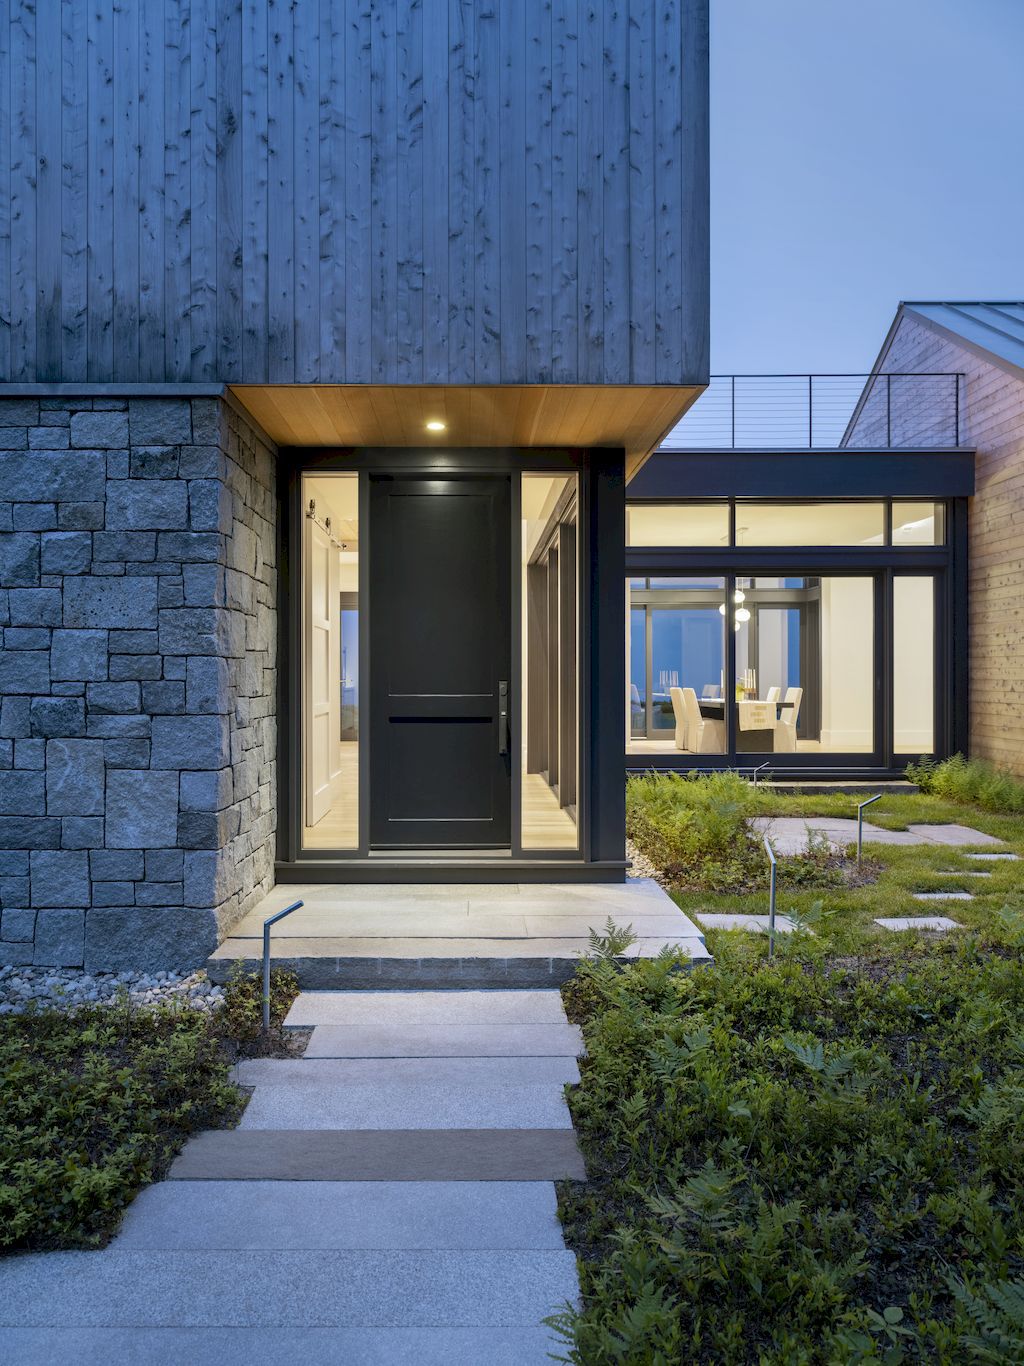 Maine Coast House, Chic Sculptural Home by Marcus Gleysteen Architects